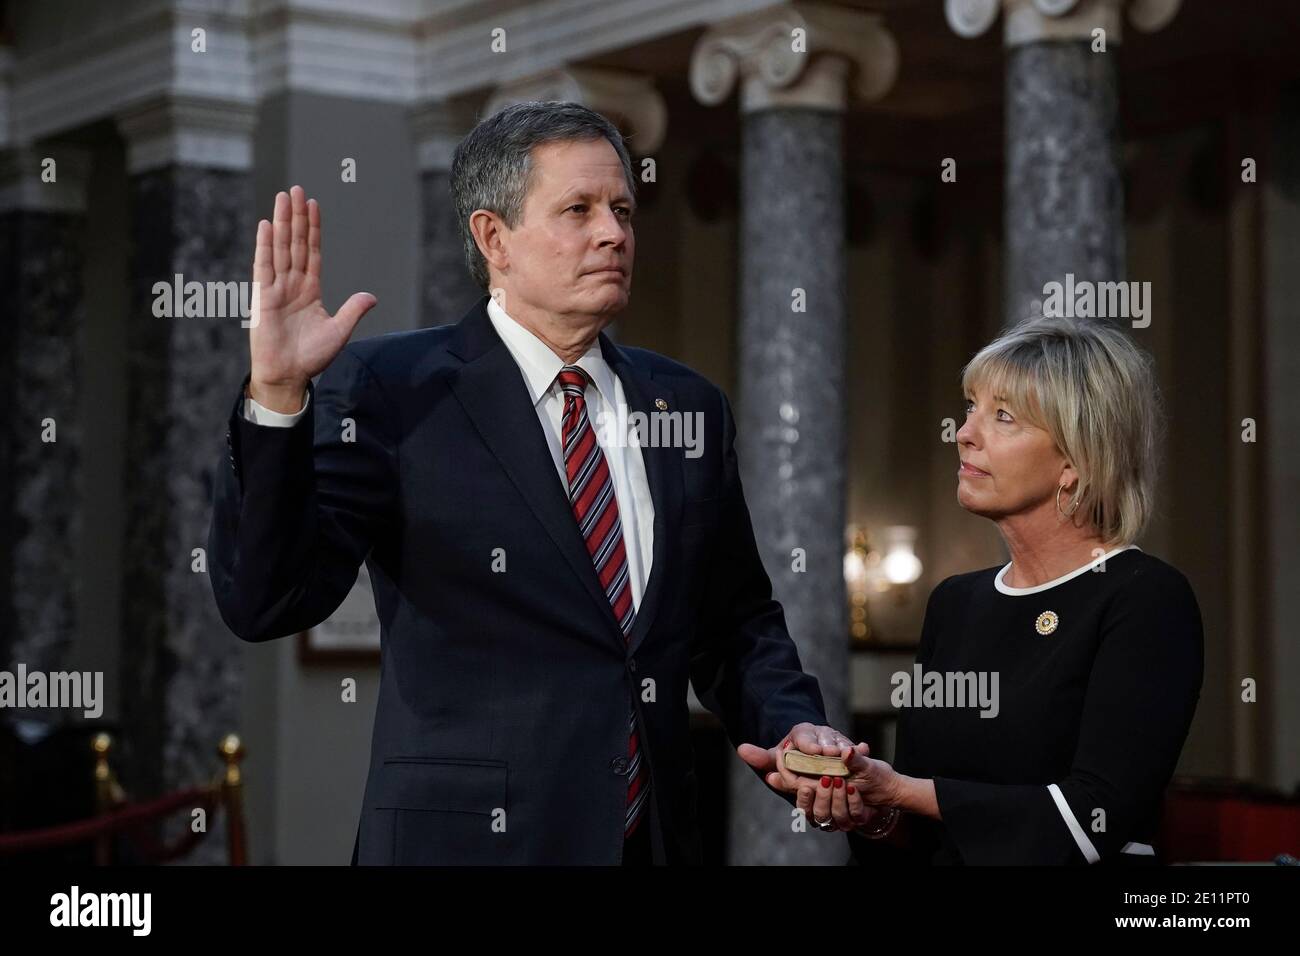 Washington, USA. 03rd Jan, 2021. Sen. Steve Daines, R-Mont., joined by his wife Cindy Daines, raises his hand to take the oath of office from Vice President Mike Pence during a reenactment ceremony in the Old Senate Chamber at the Capitol in Washington, Sunday, Jan. 3, 2021. (Photo by J. Scott Applewhite/Pool/Sipa USA) Credit: Sipa USA/Alamy Live News Stock Photo